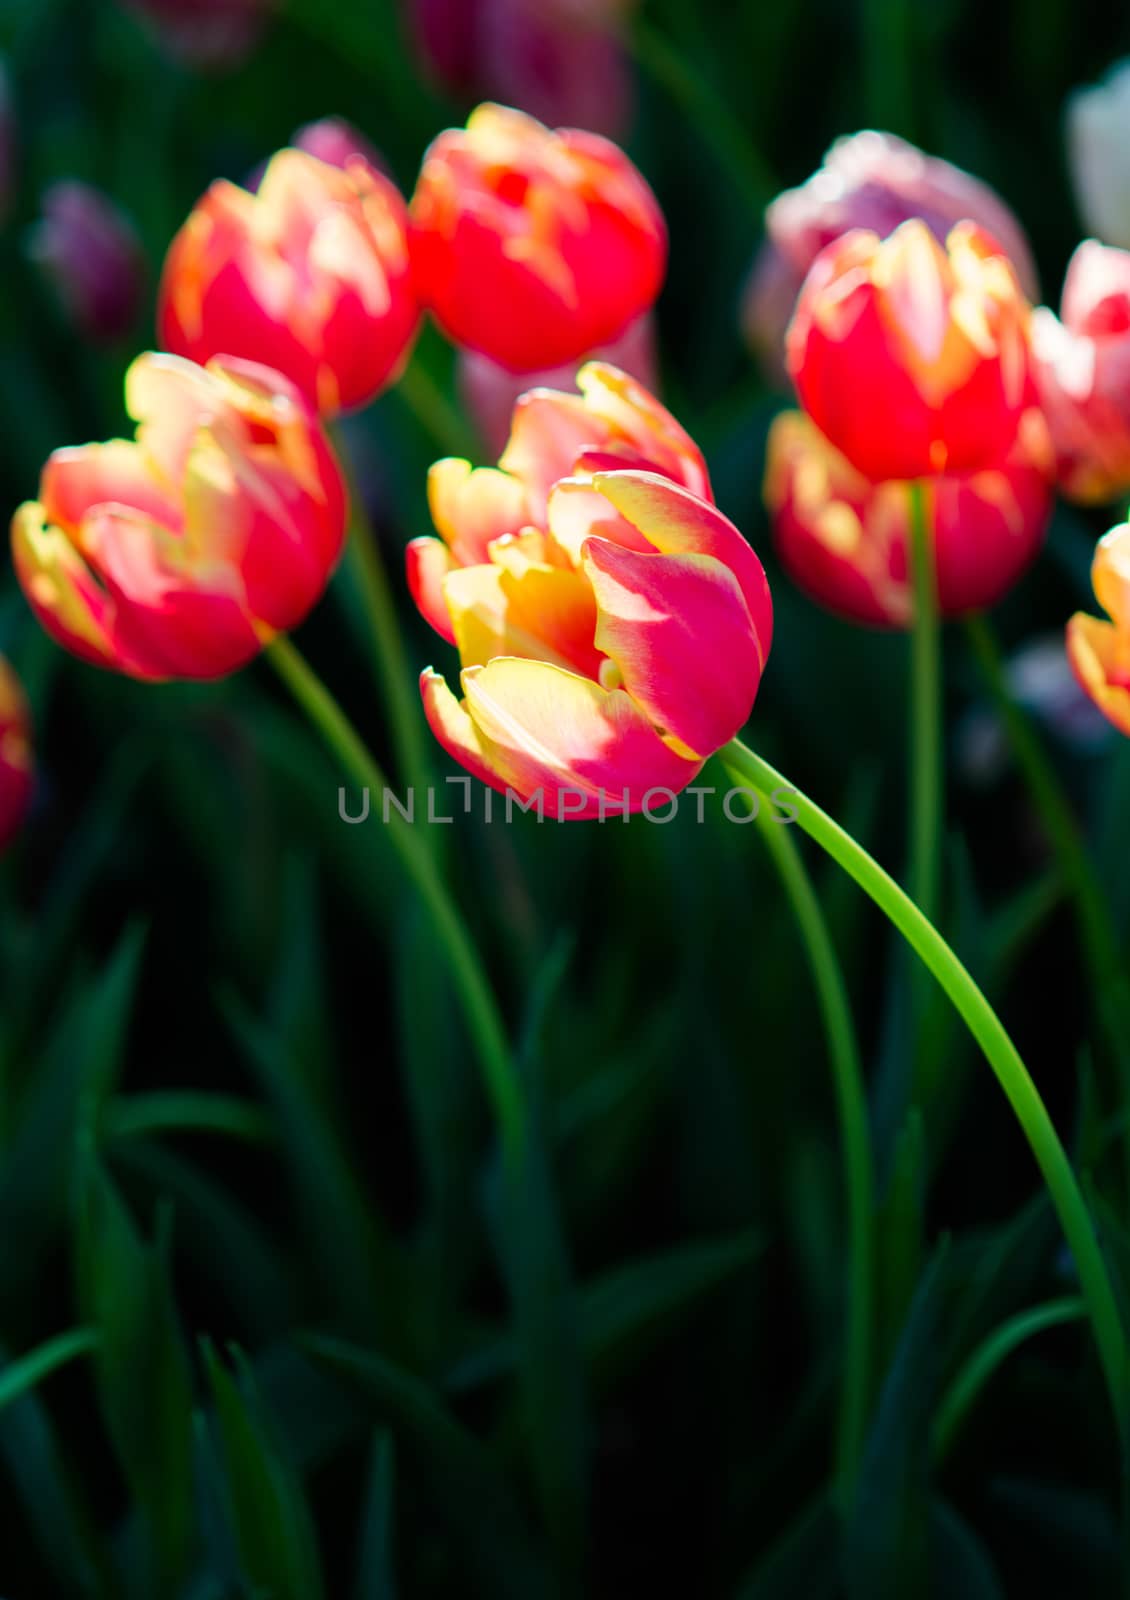 Tulip in spring with soft focus, unfocused blurred spring Tulip, by yuiyuize